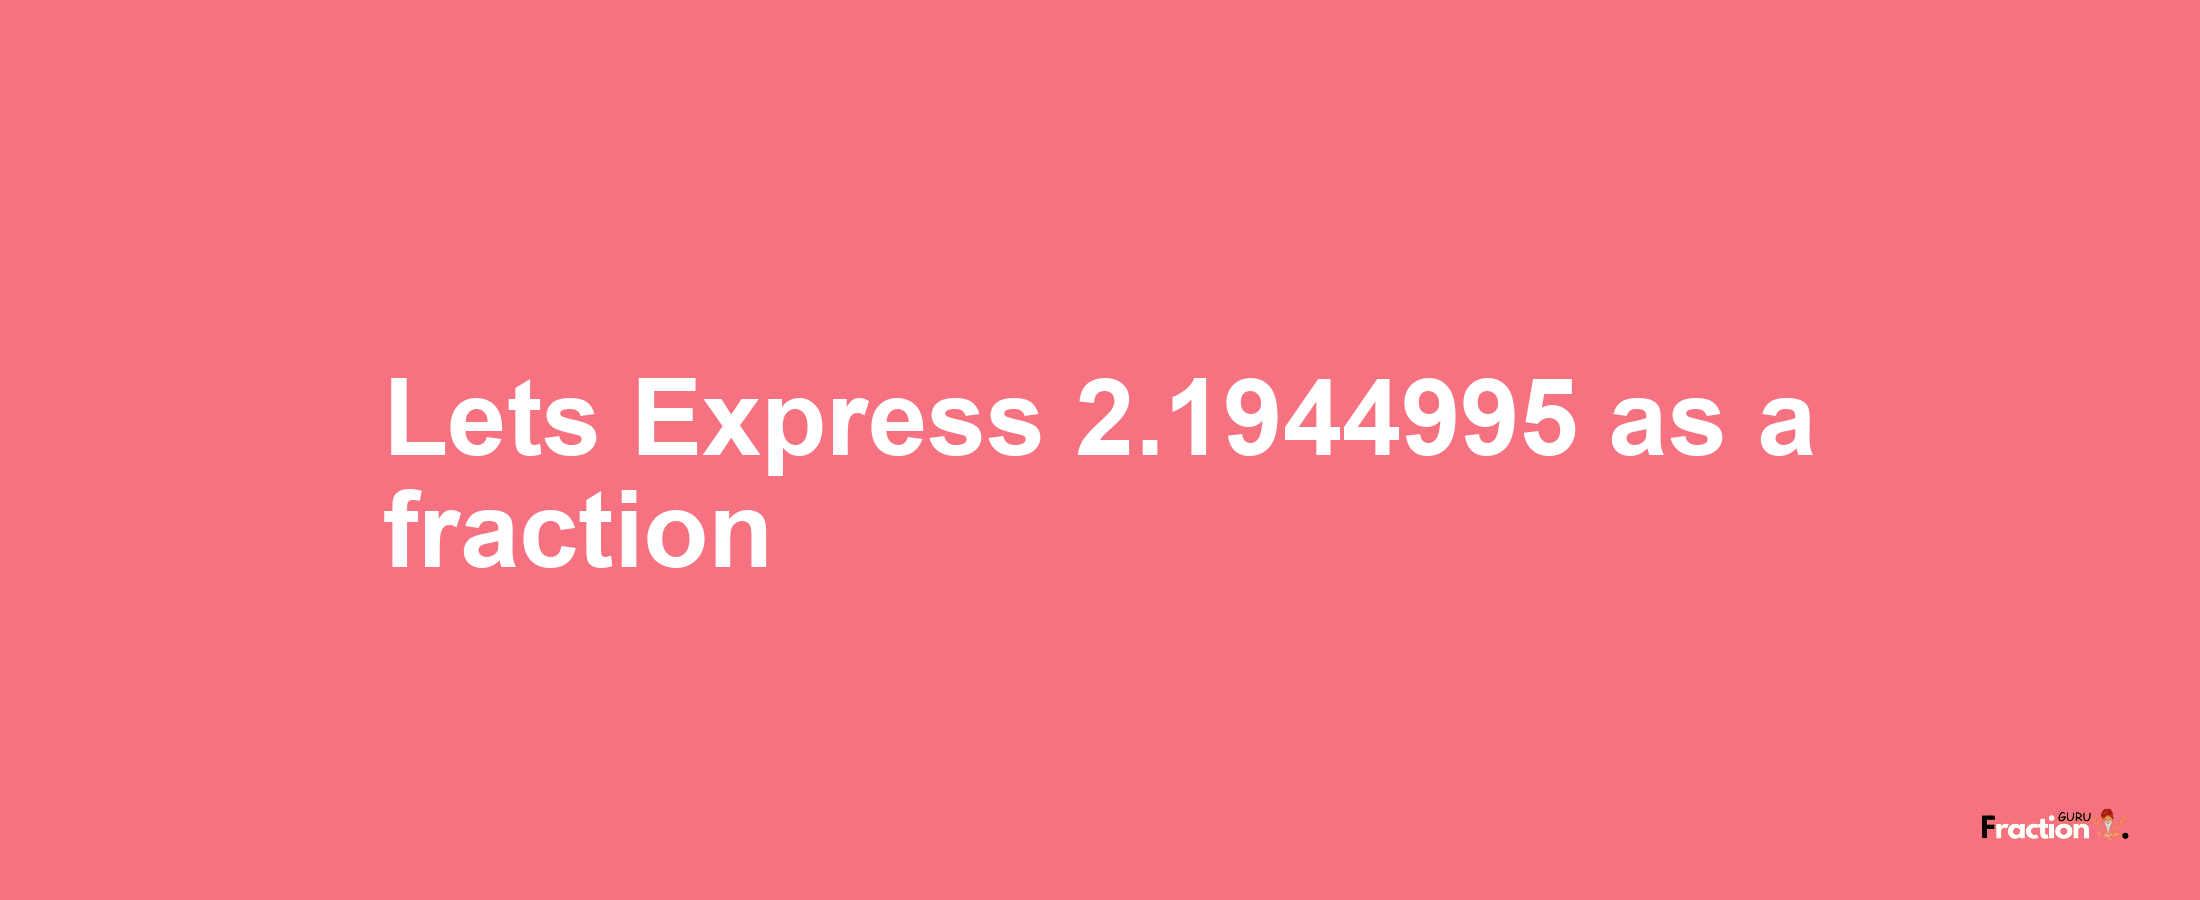 Lets Express 2.1944995 as afraction